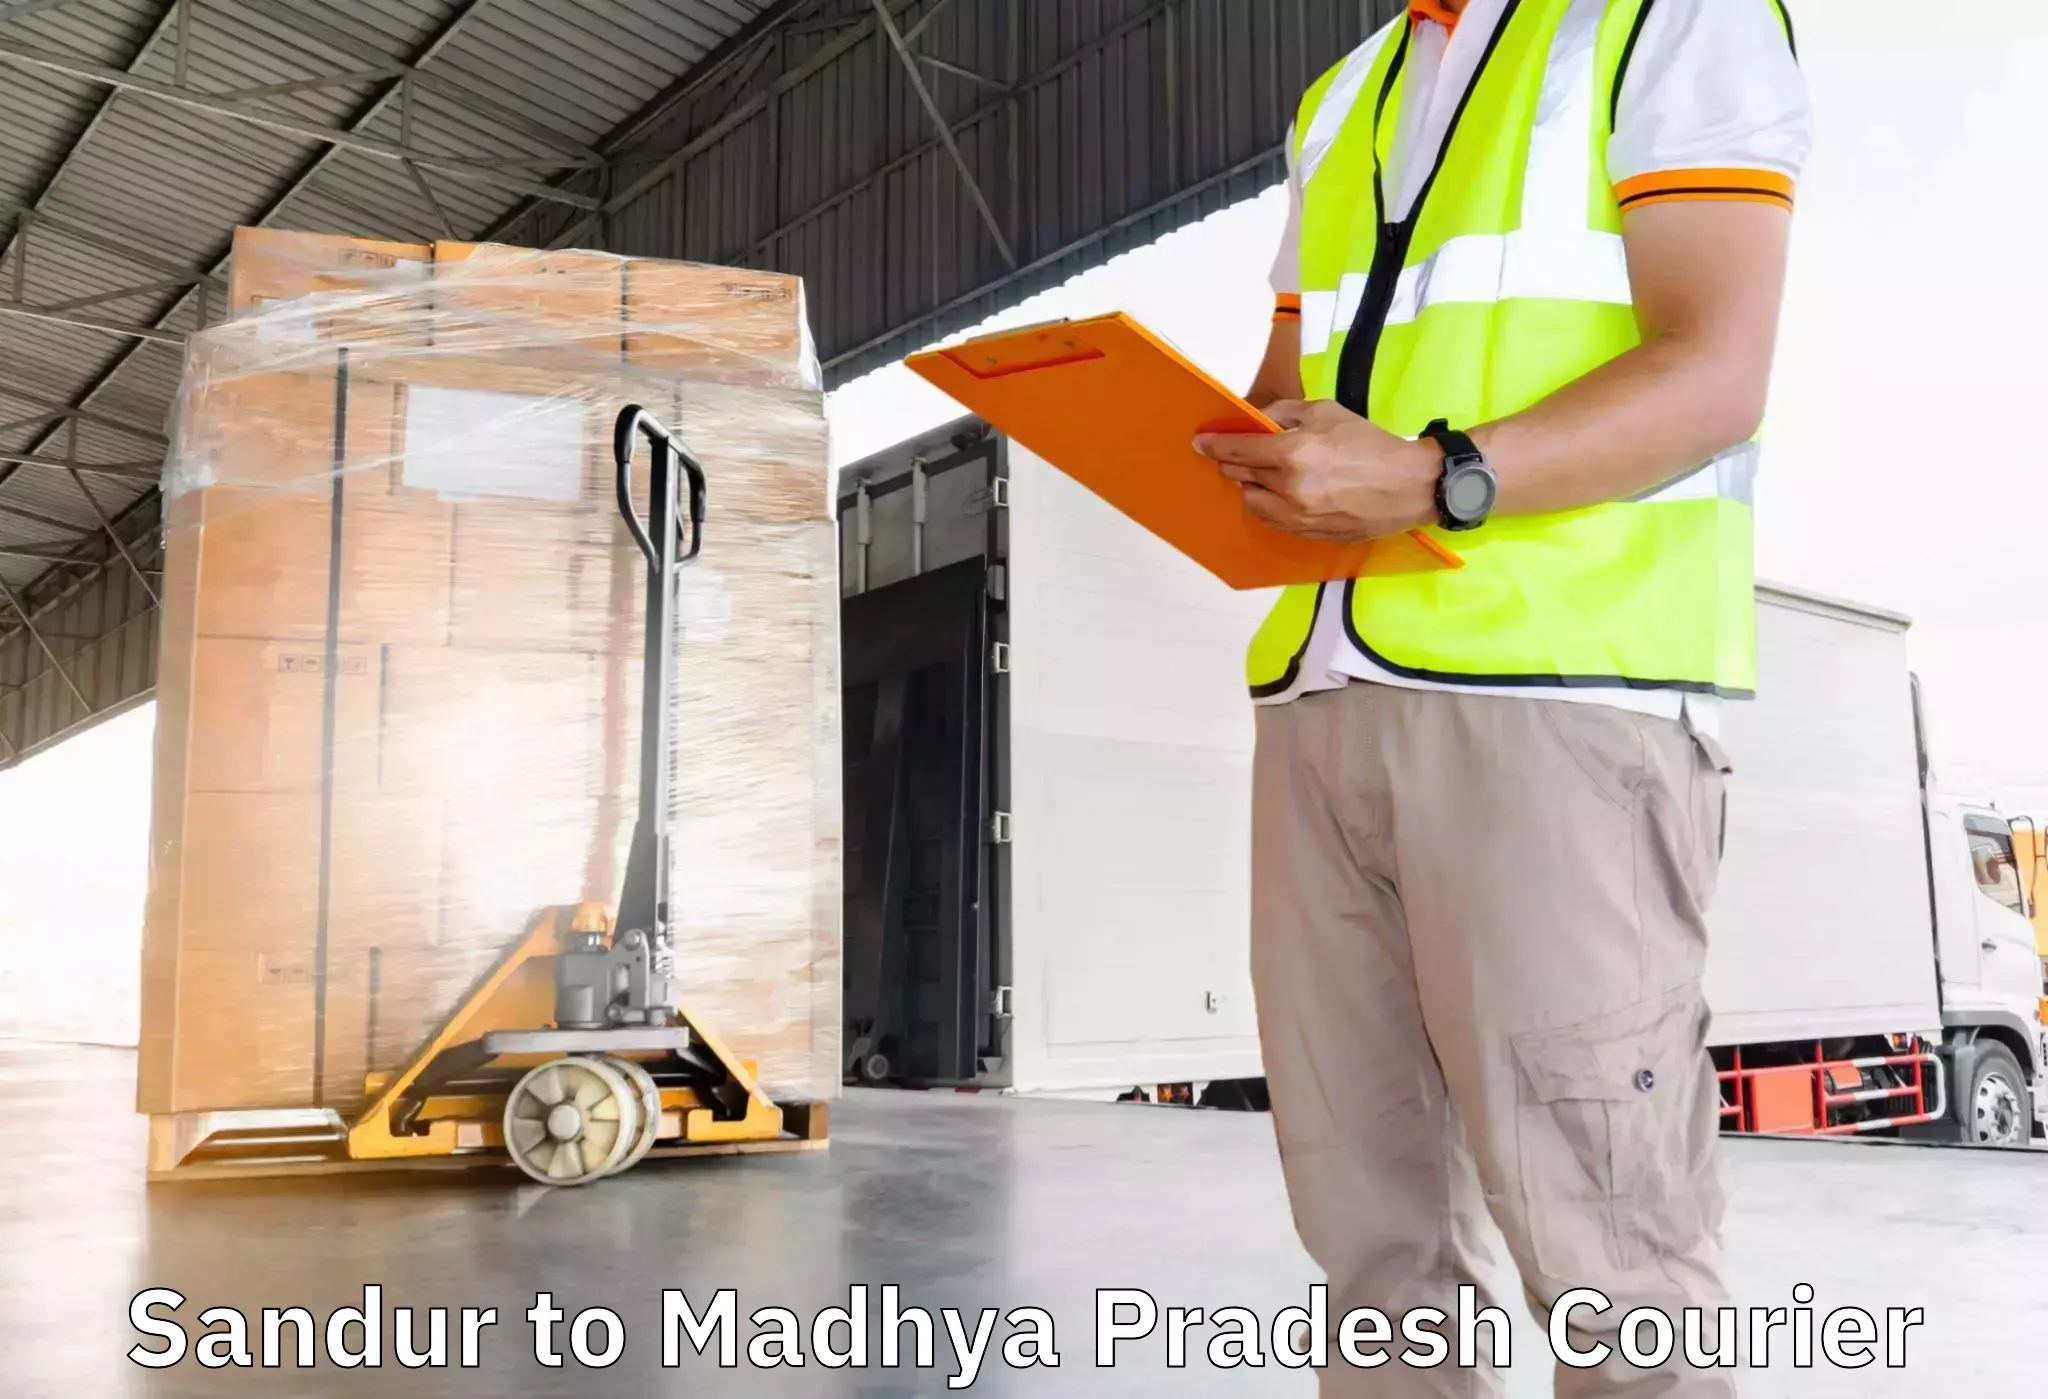 Professional moving assistance in Sandur to Raipur Karchuliyan